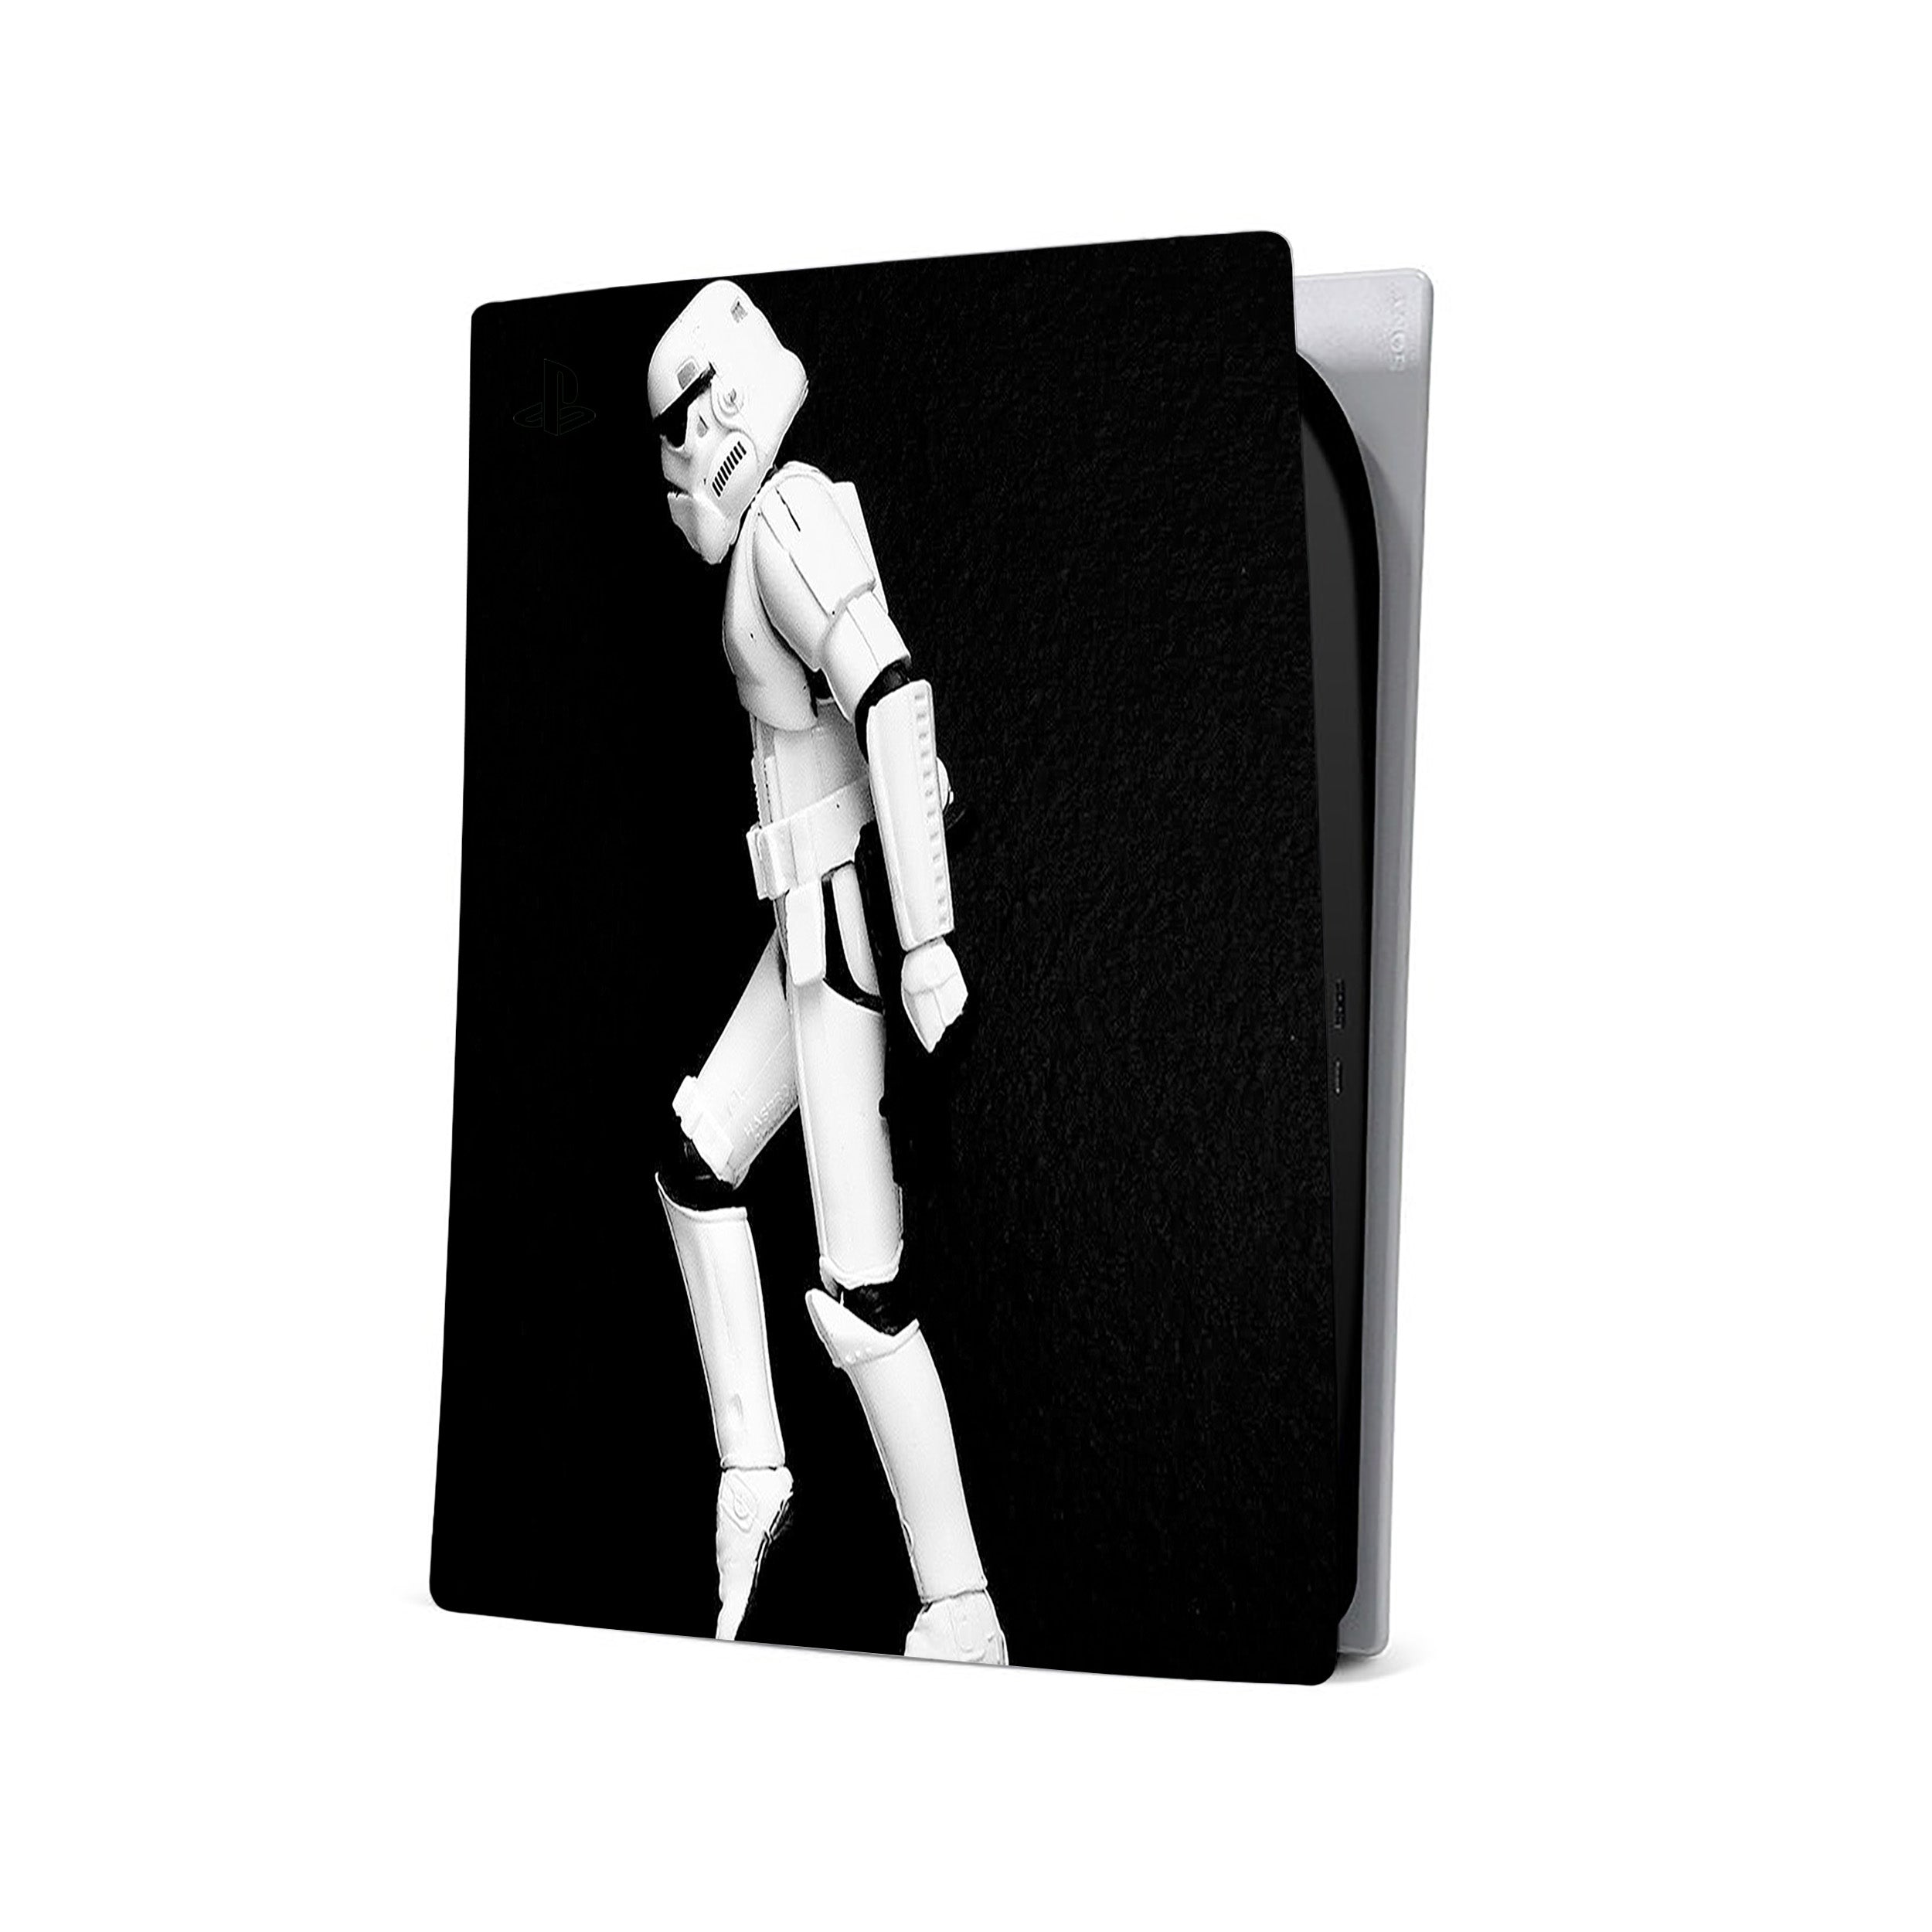 A video game skin featuring a Star Wars Storm Trooper design for the PS5.